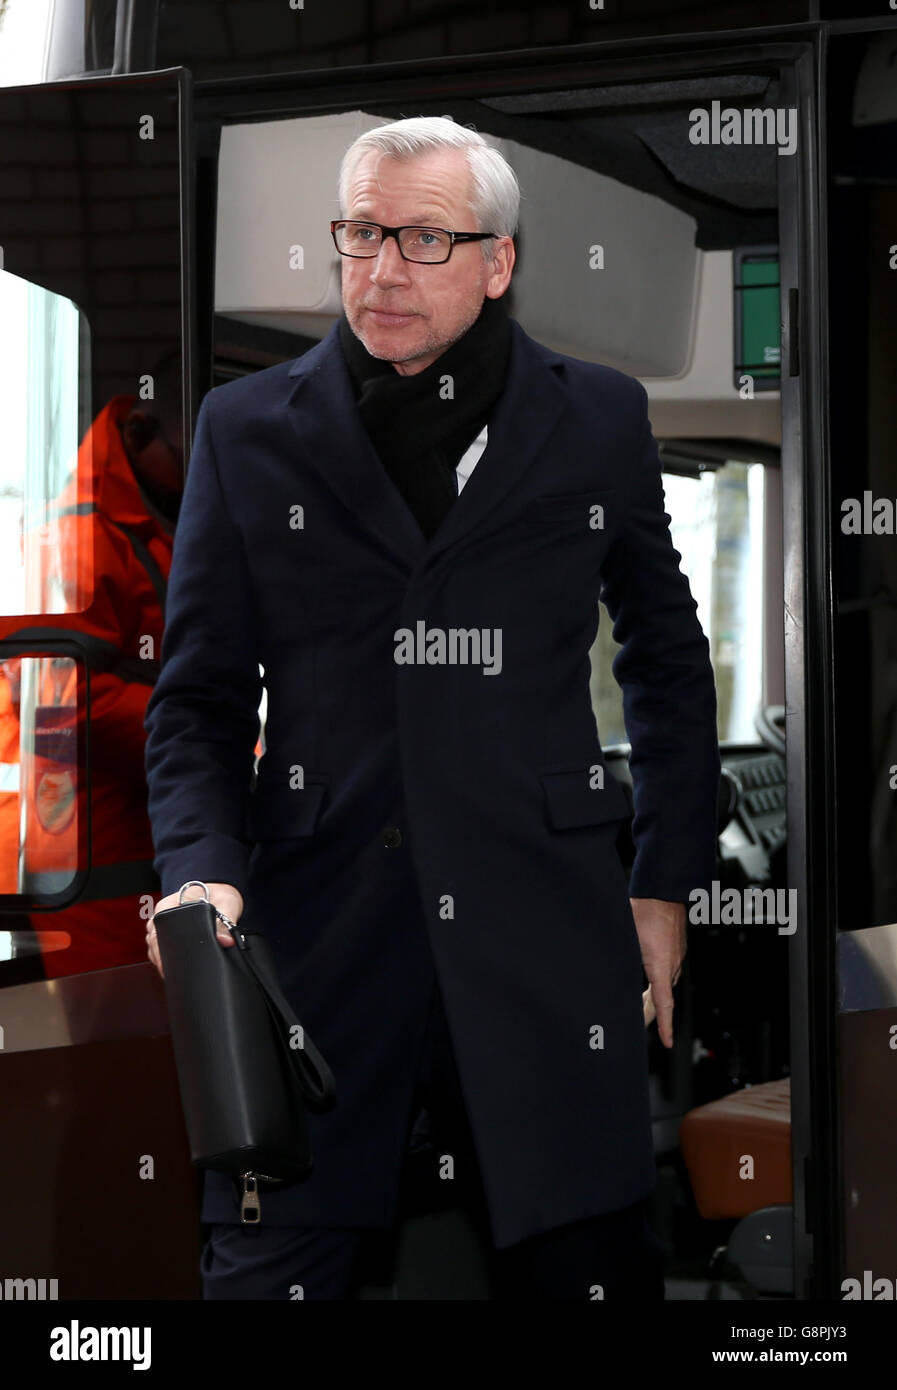 Crystal Palace manager Alan Pardew steps off the team coach before the Barclays Premier League match at The Hawthorns, West Bromwich. Stock Photo